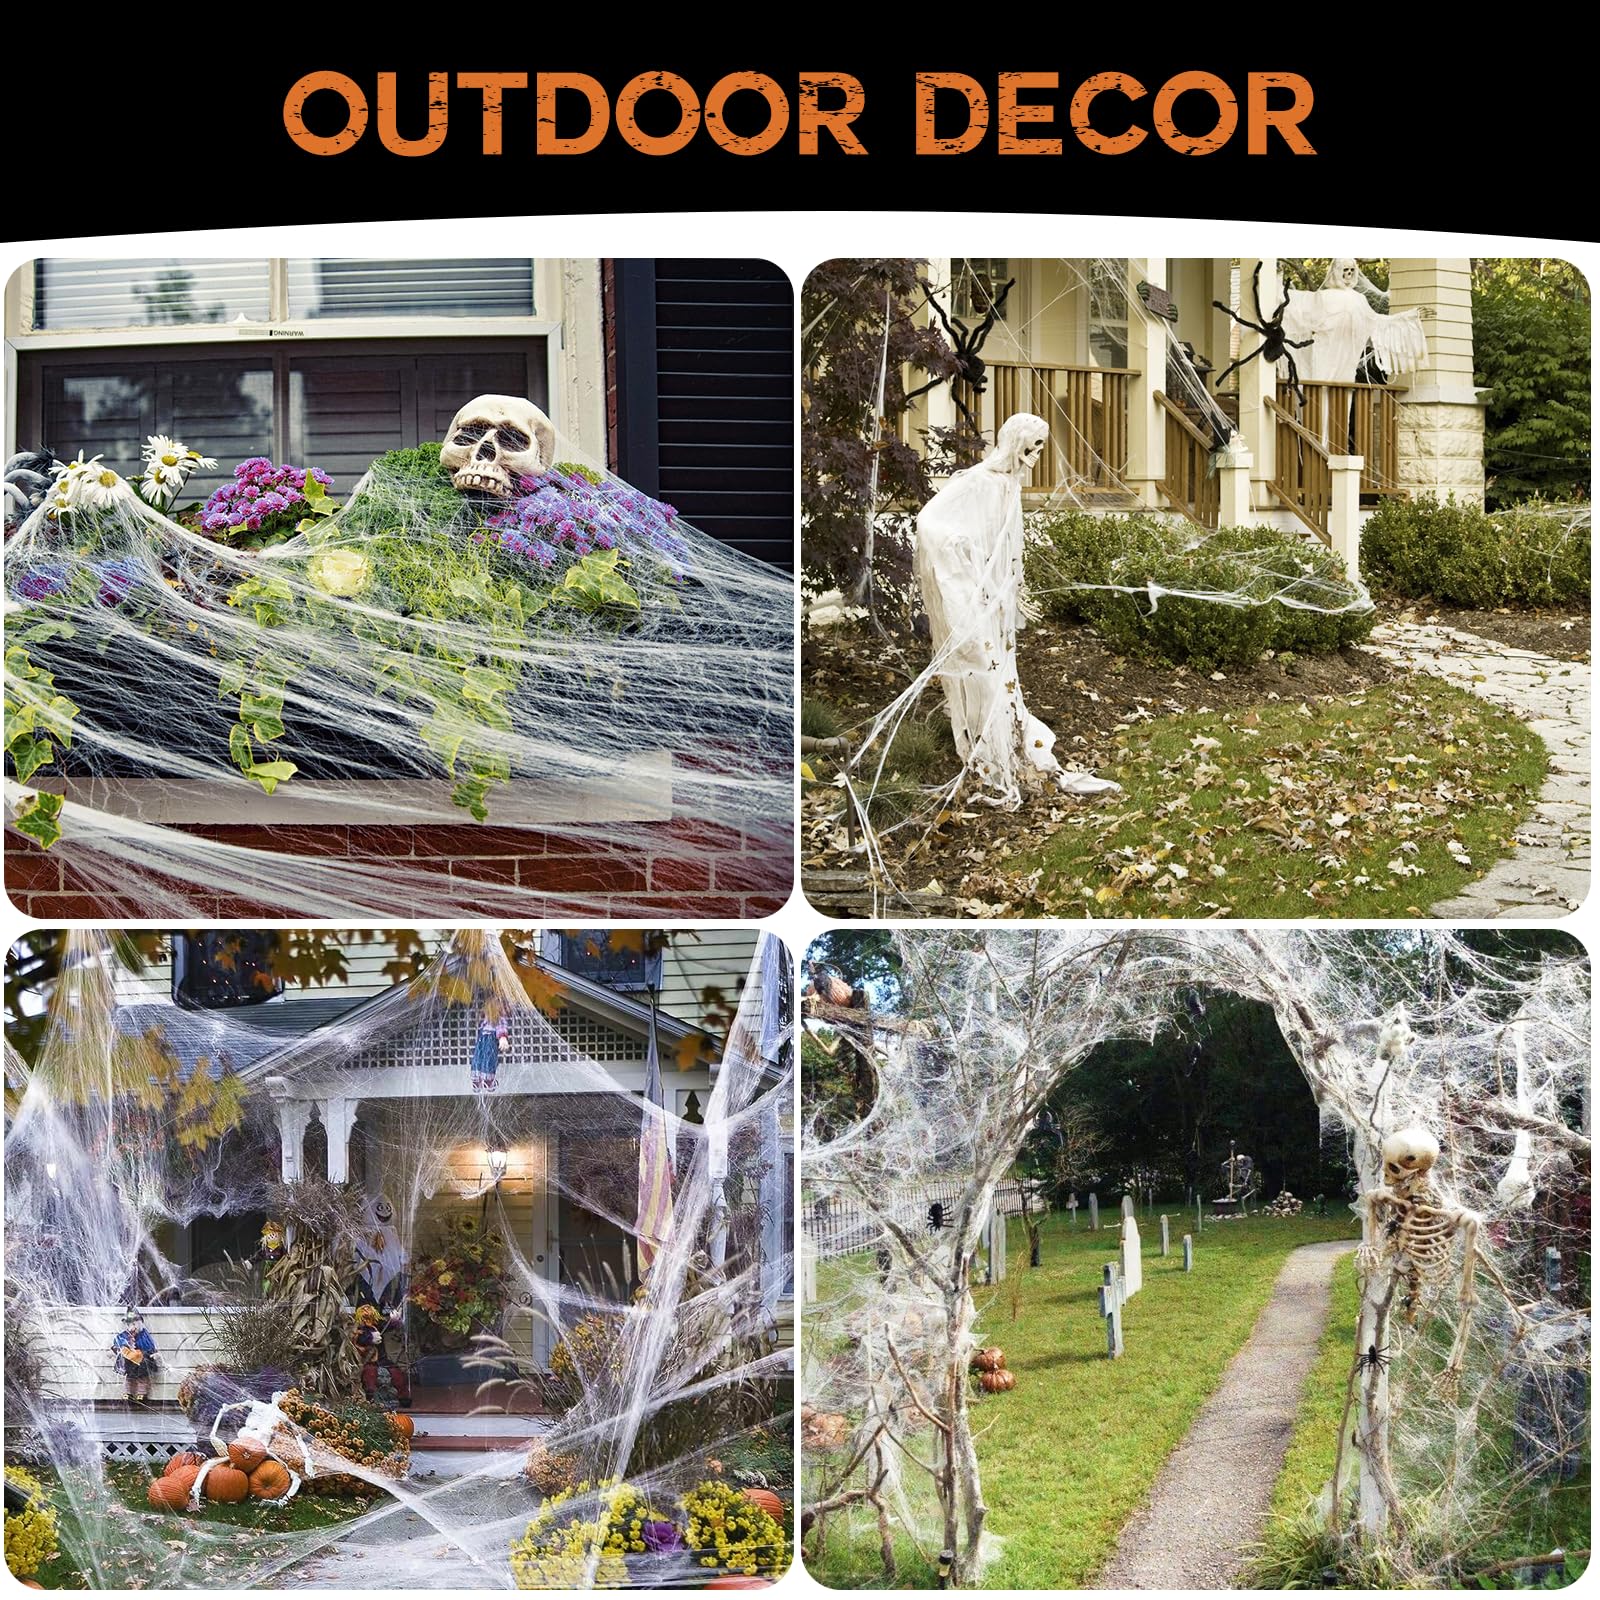 Aubeco 900 sqft Halloween Spider Webs with 30 Extra Fake Spiders, Outside Scary Decor, Super Stretchy Cobwebs Set for Halloween Decor Indoor and Outdoor Party Supplies